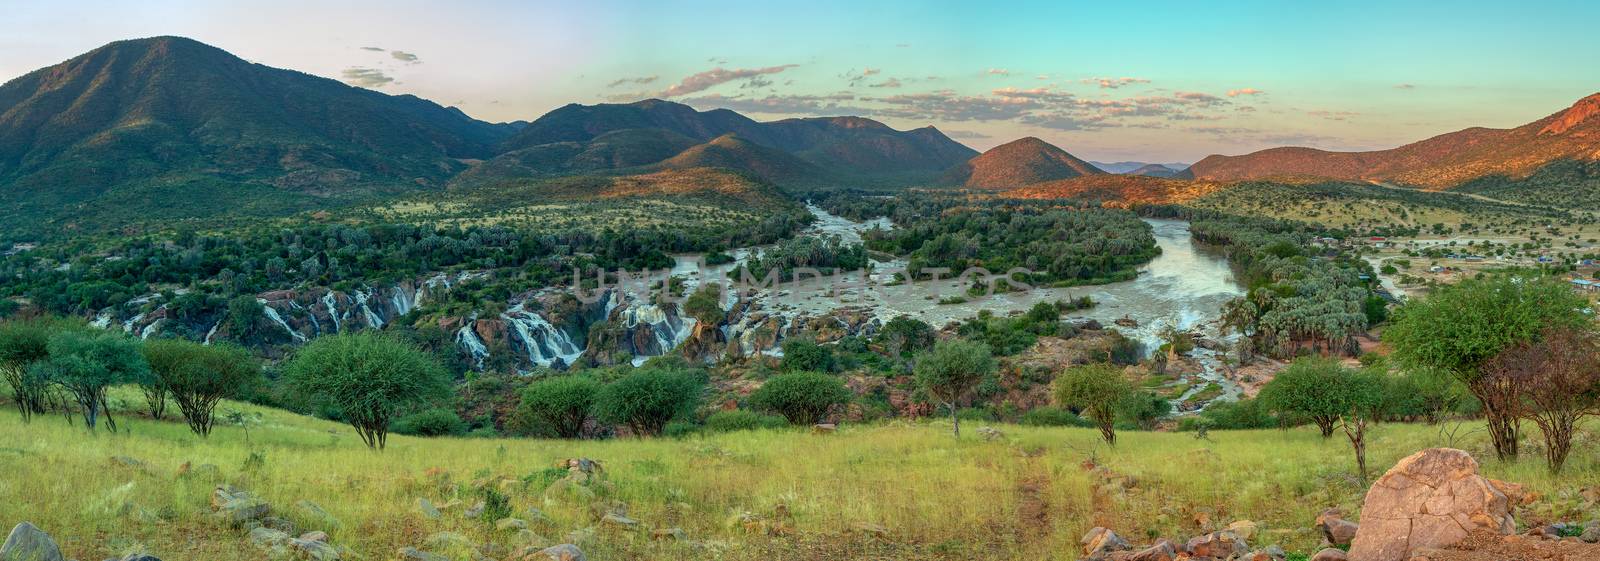 Epupa Falls on the Kunene River in Namibia by artush